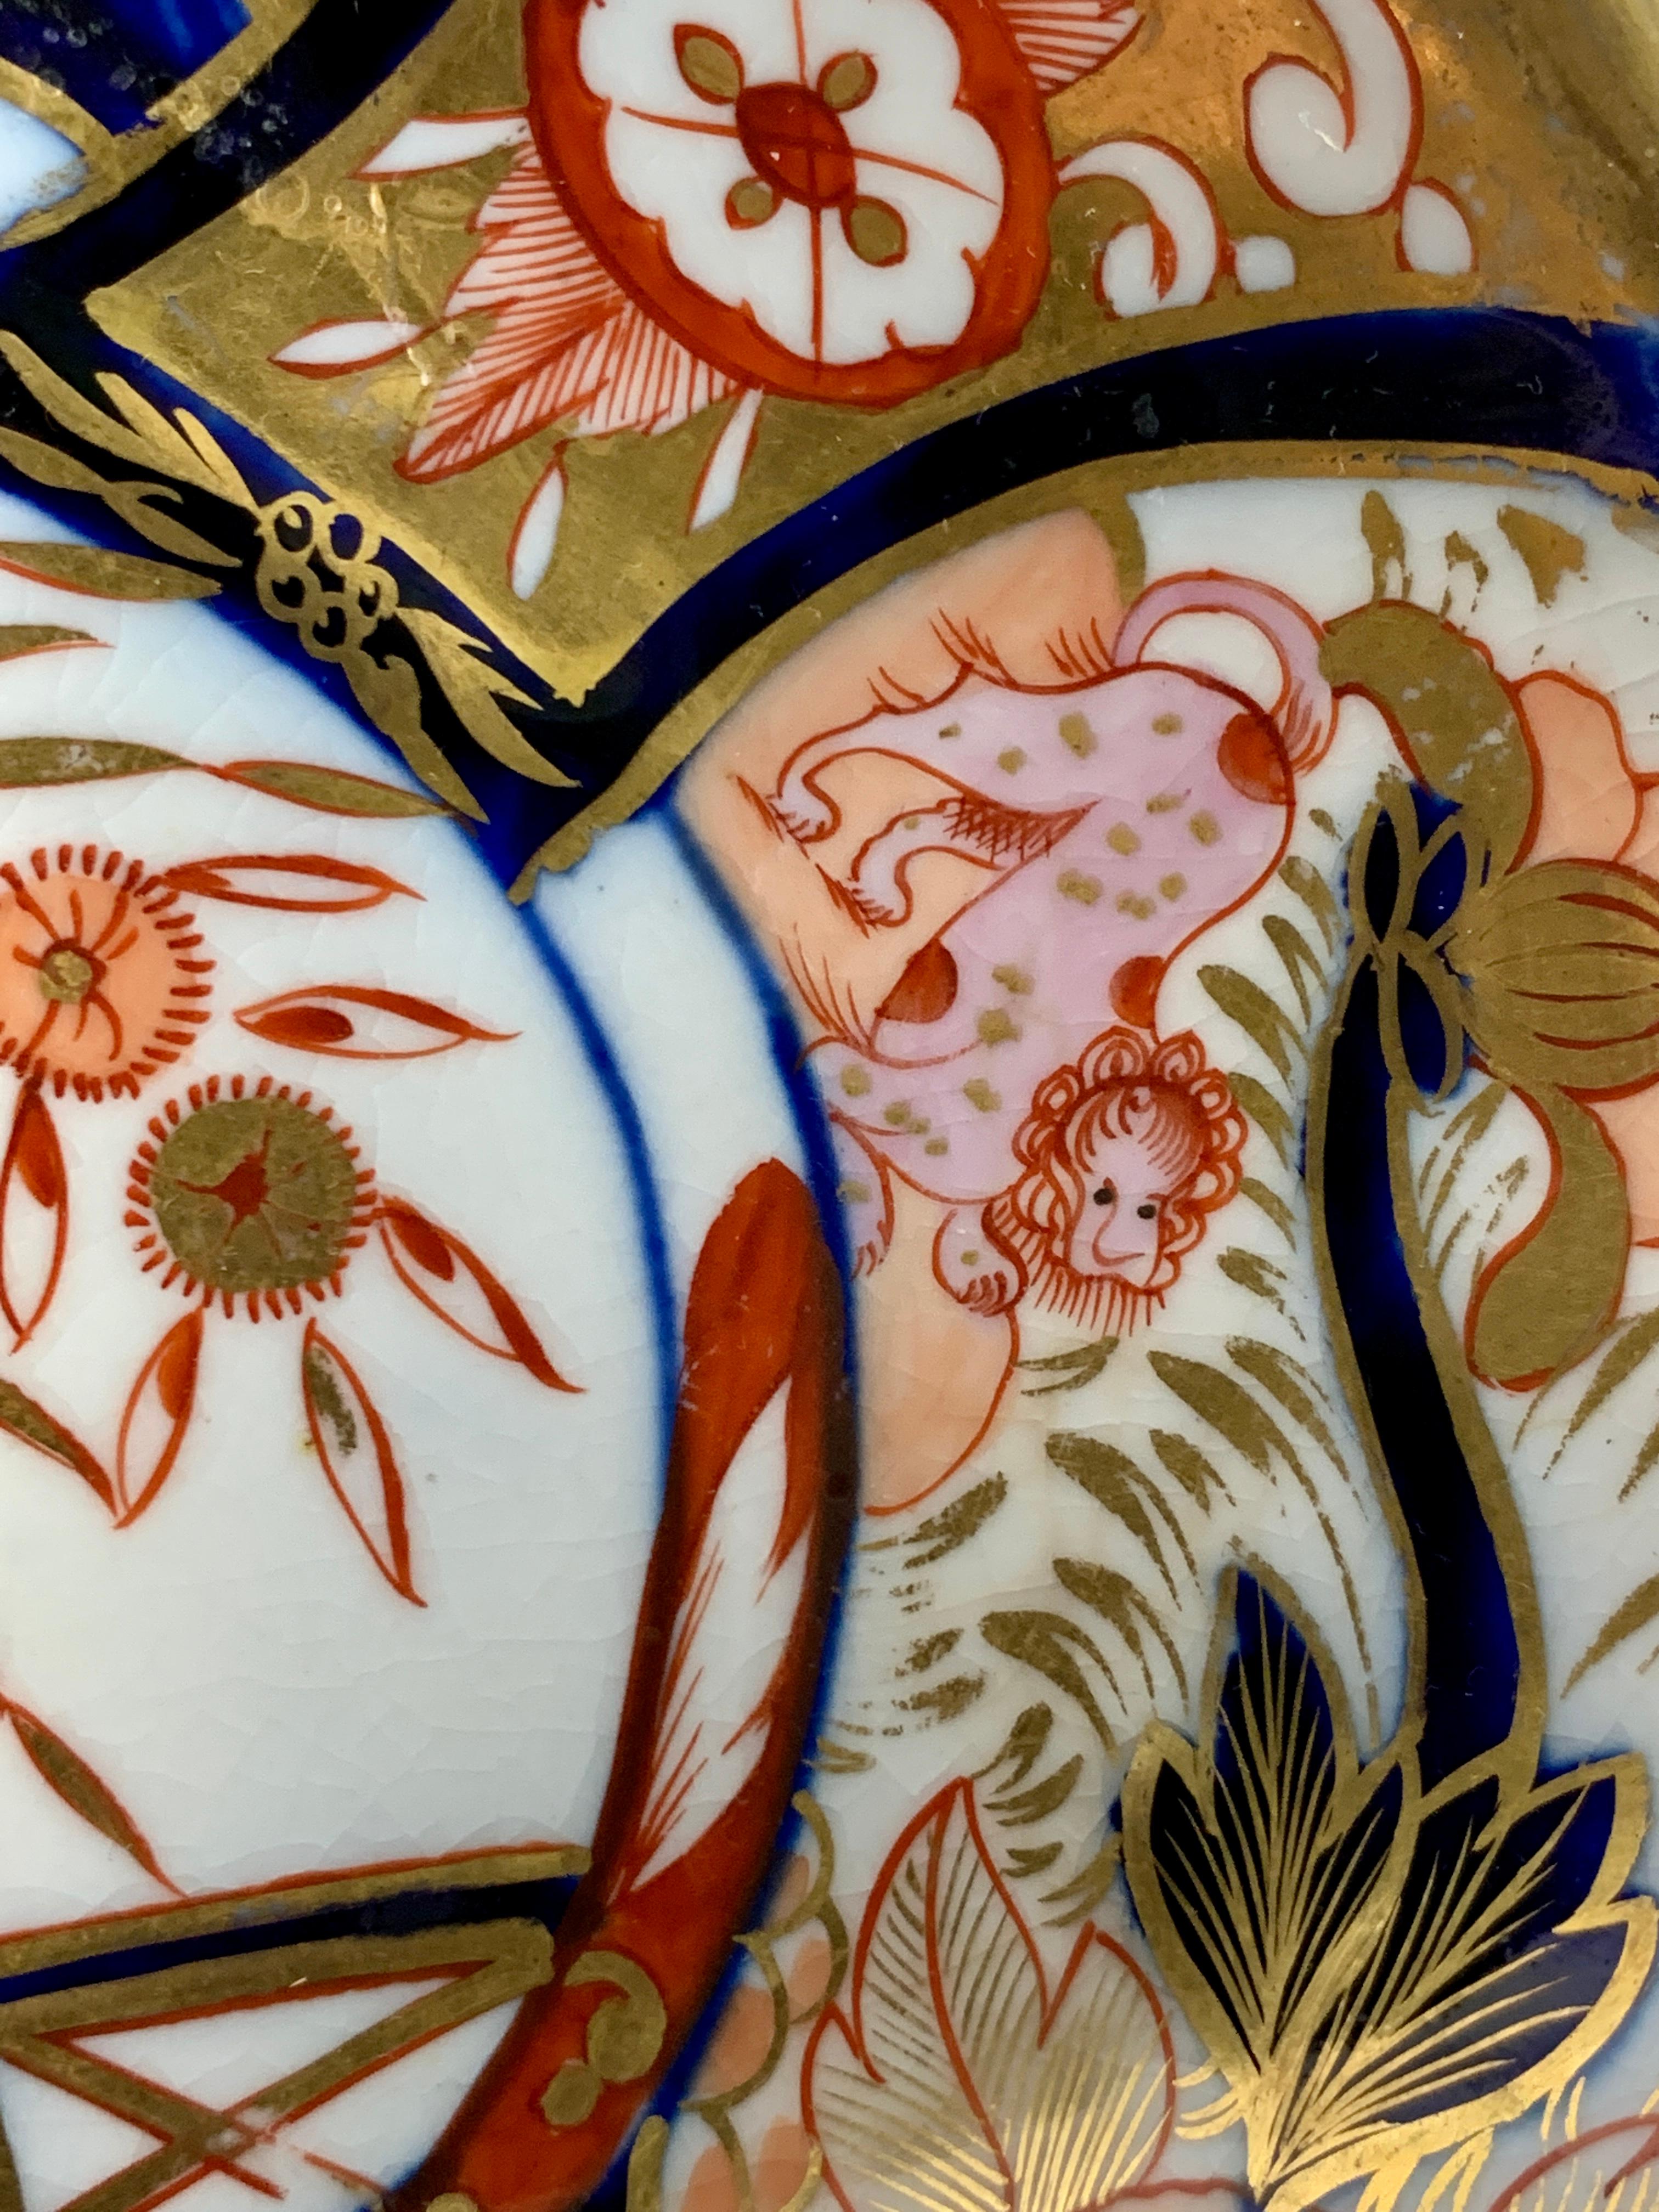 Why we love it: The intensity of the Imari colors and the fabulous pink spotted lion. 
This shell-shaped dish is hand-painted in the Coalport Admiral Nelson pattern. It was made in England during the Regency period circa 1810. The center scene